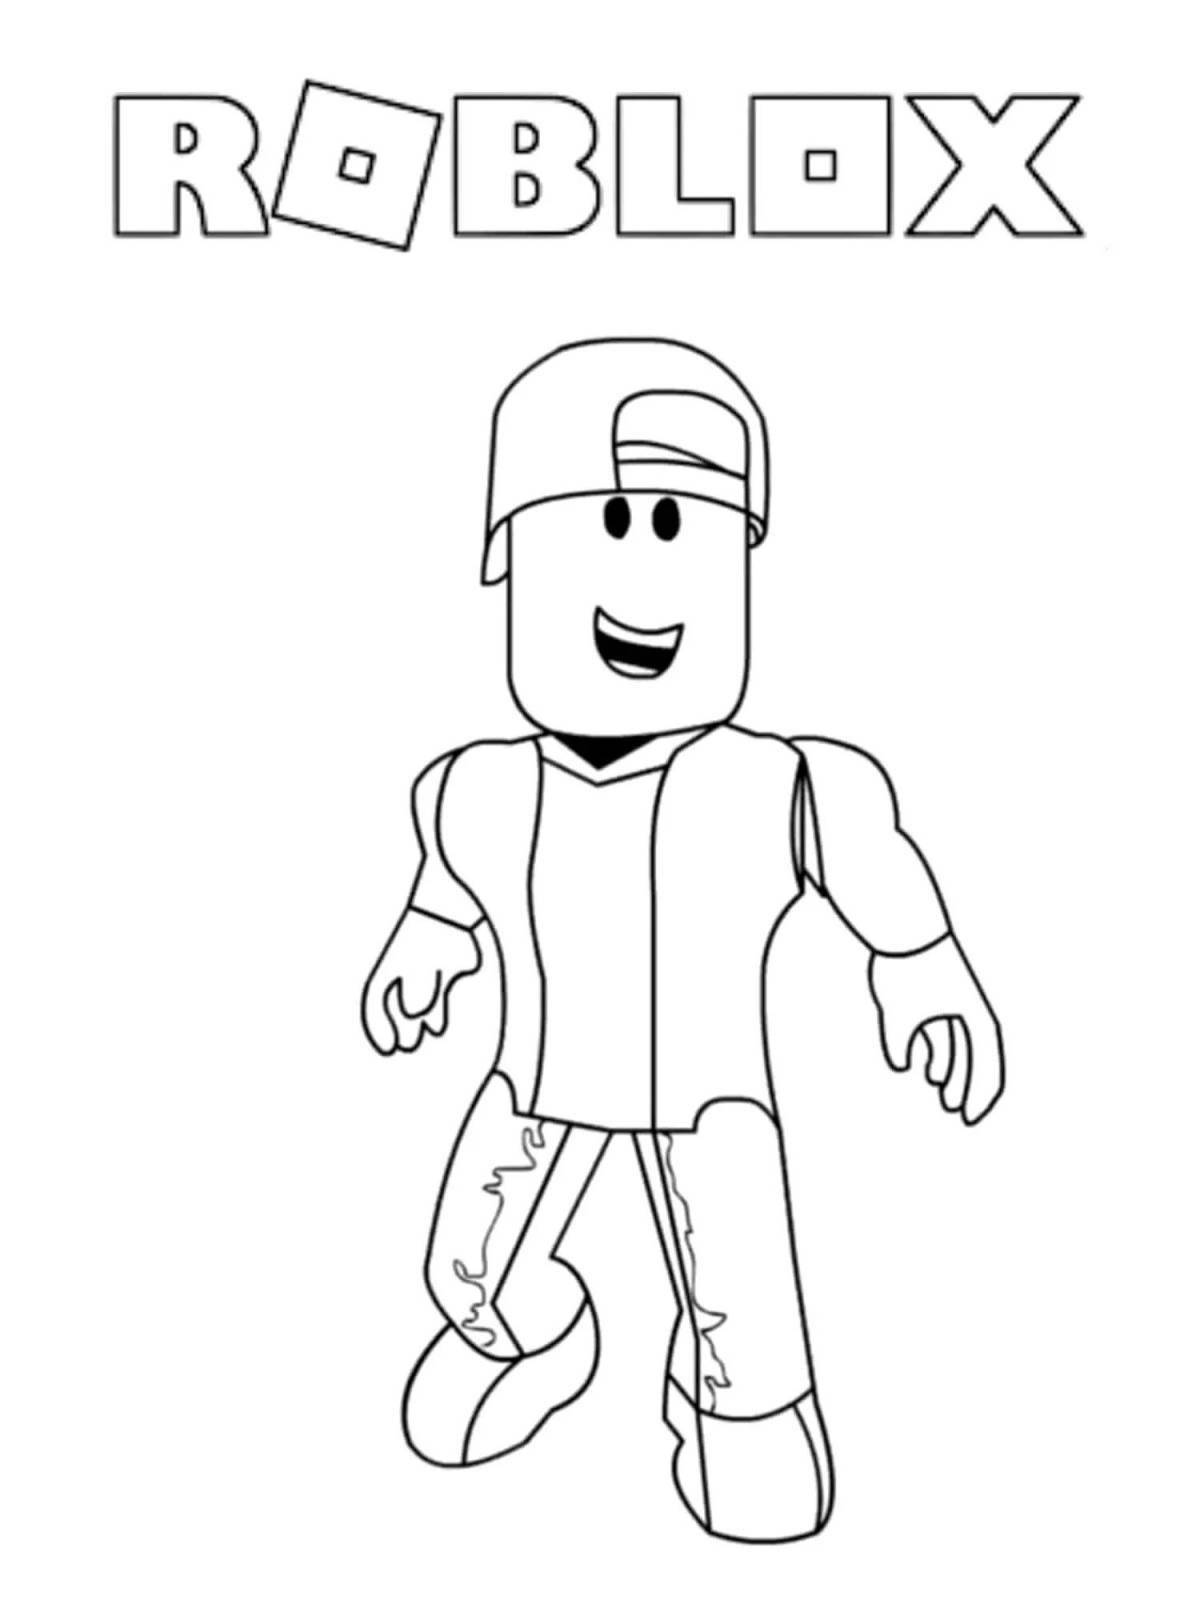 Roblox live donator coloring page